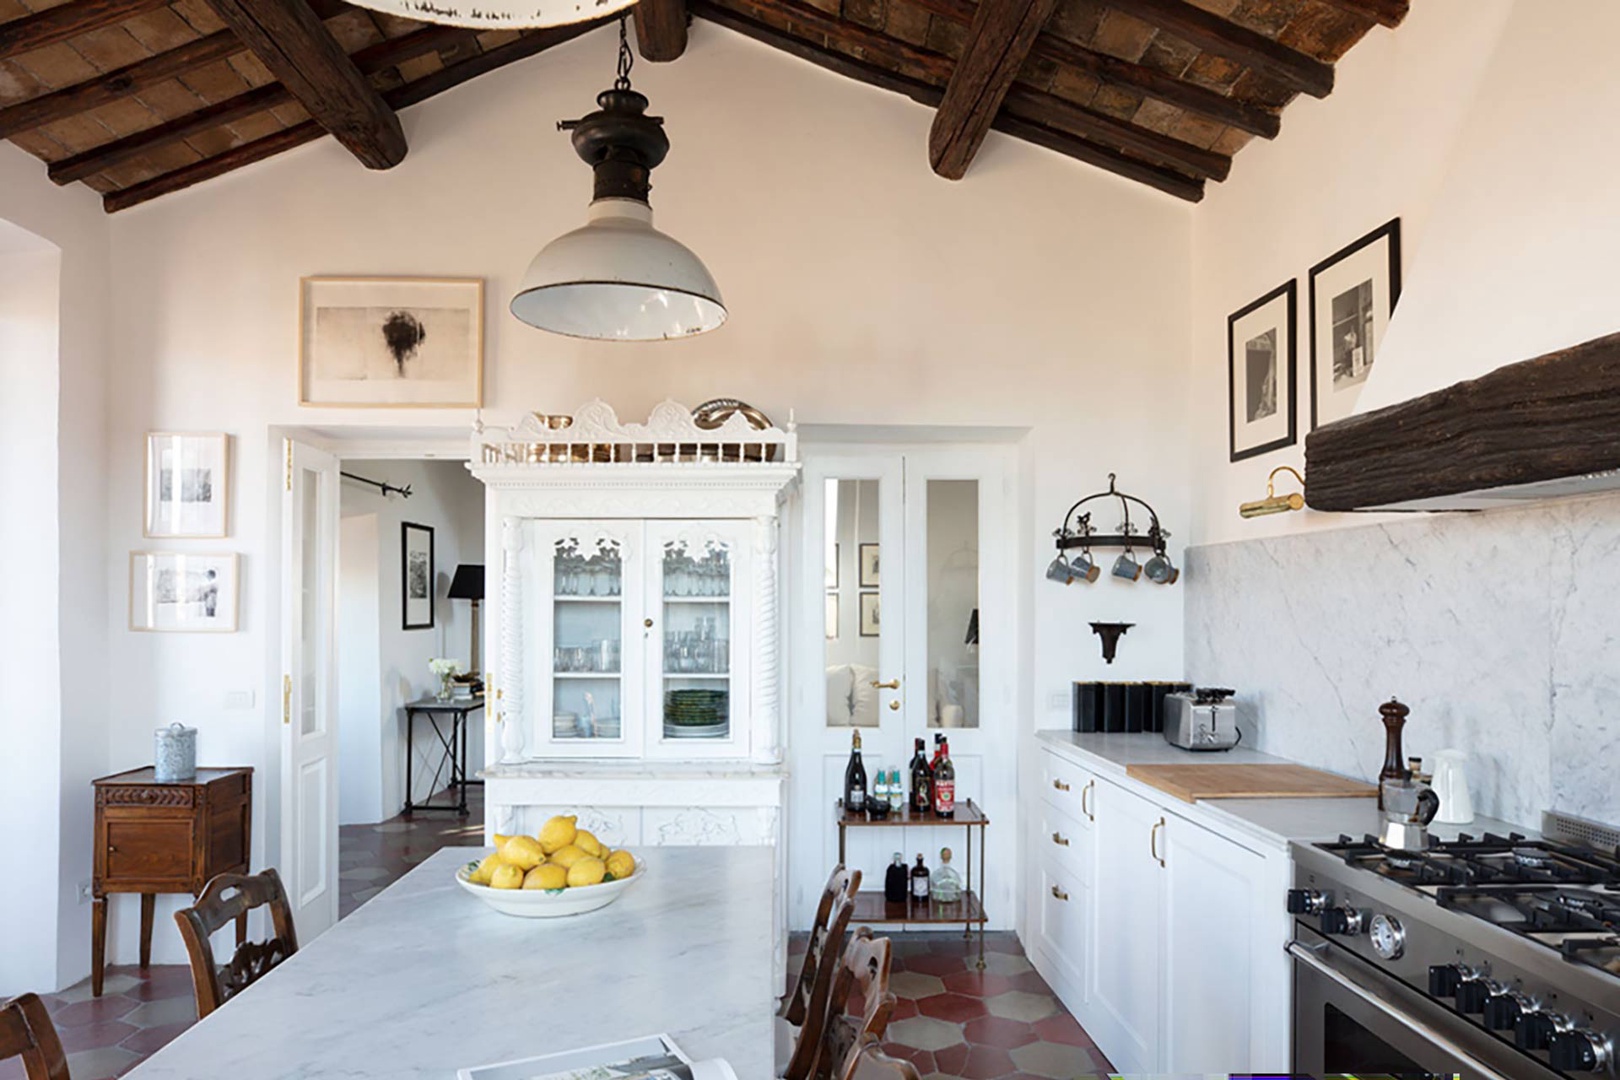 Welcome to Lucia, a charming rooftop apartment in the heart of Rome.